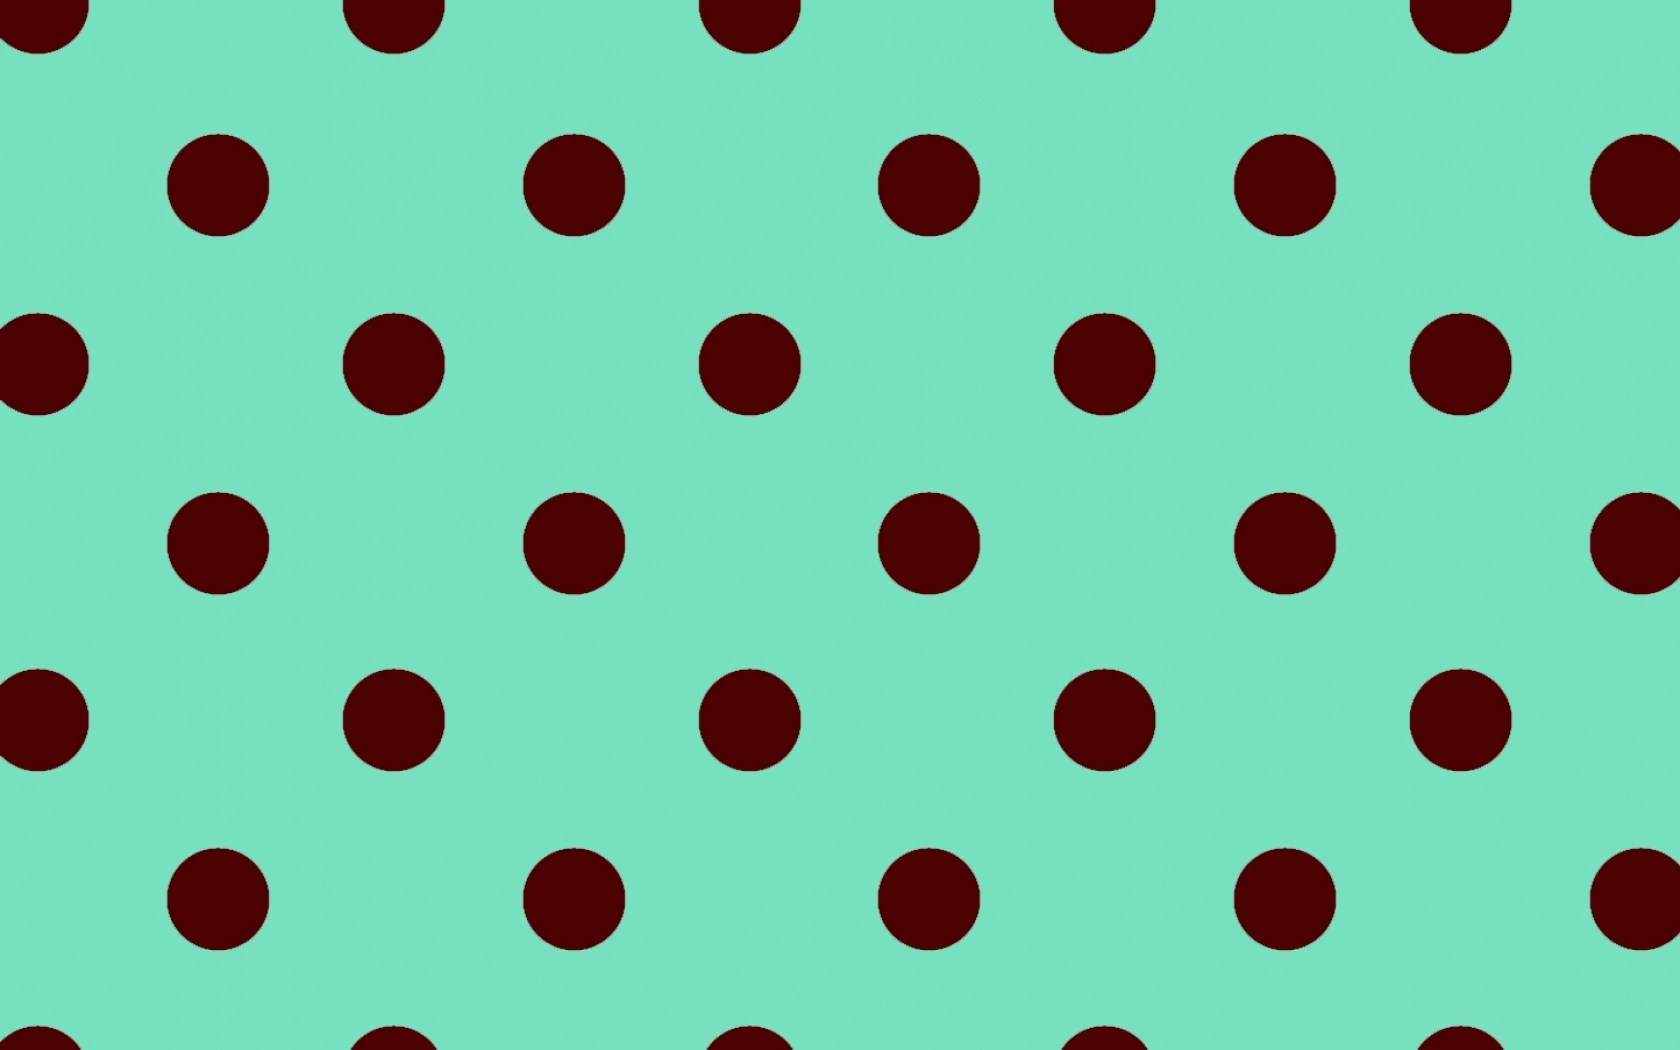 Related Image Of Polka Dot iPhone Wallpaper